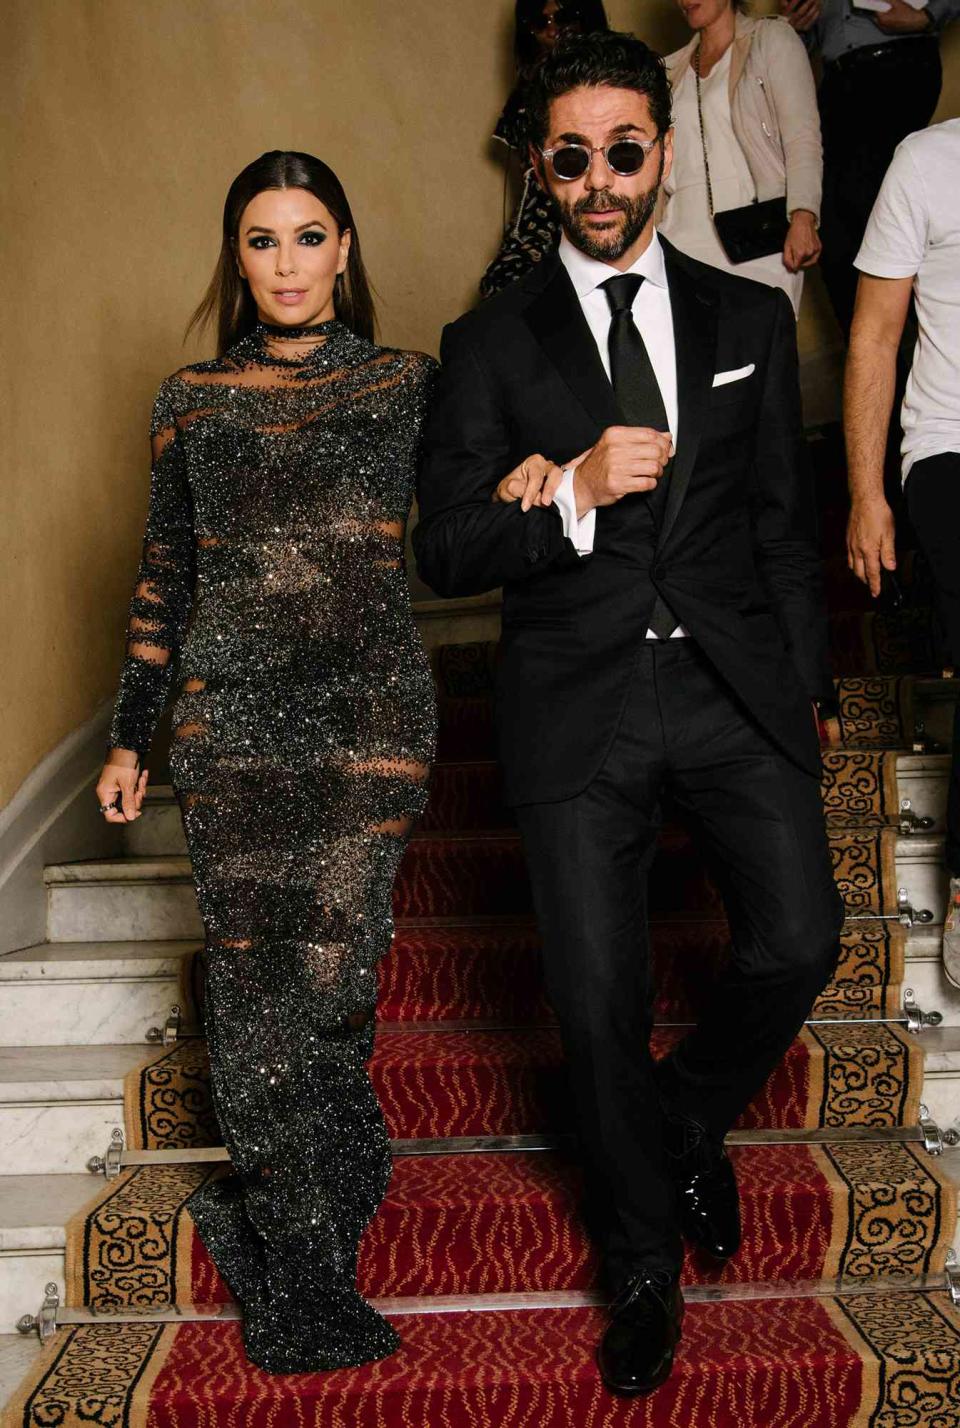 Eva Longoria and Jose Baston depart the Martinez Hotel during the 70th annual Cannes Film Festival on May 23, 2017 in Cannes, France